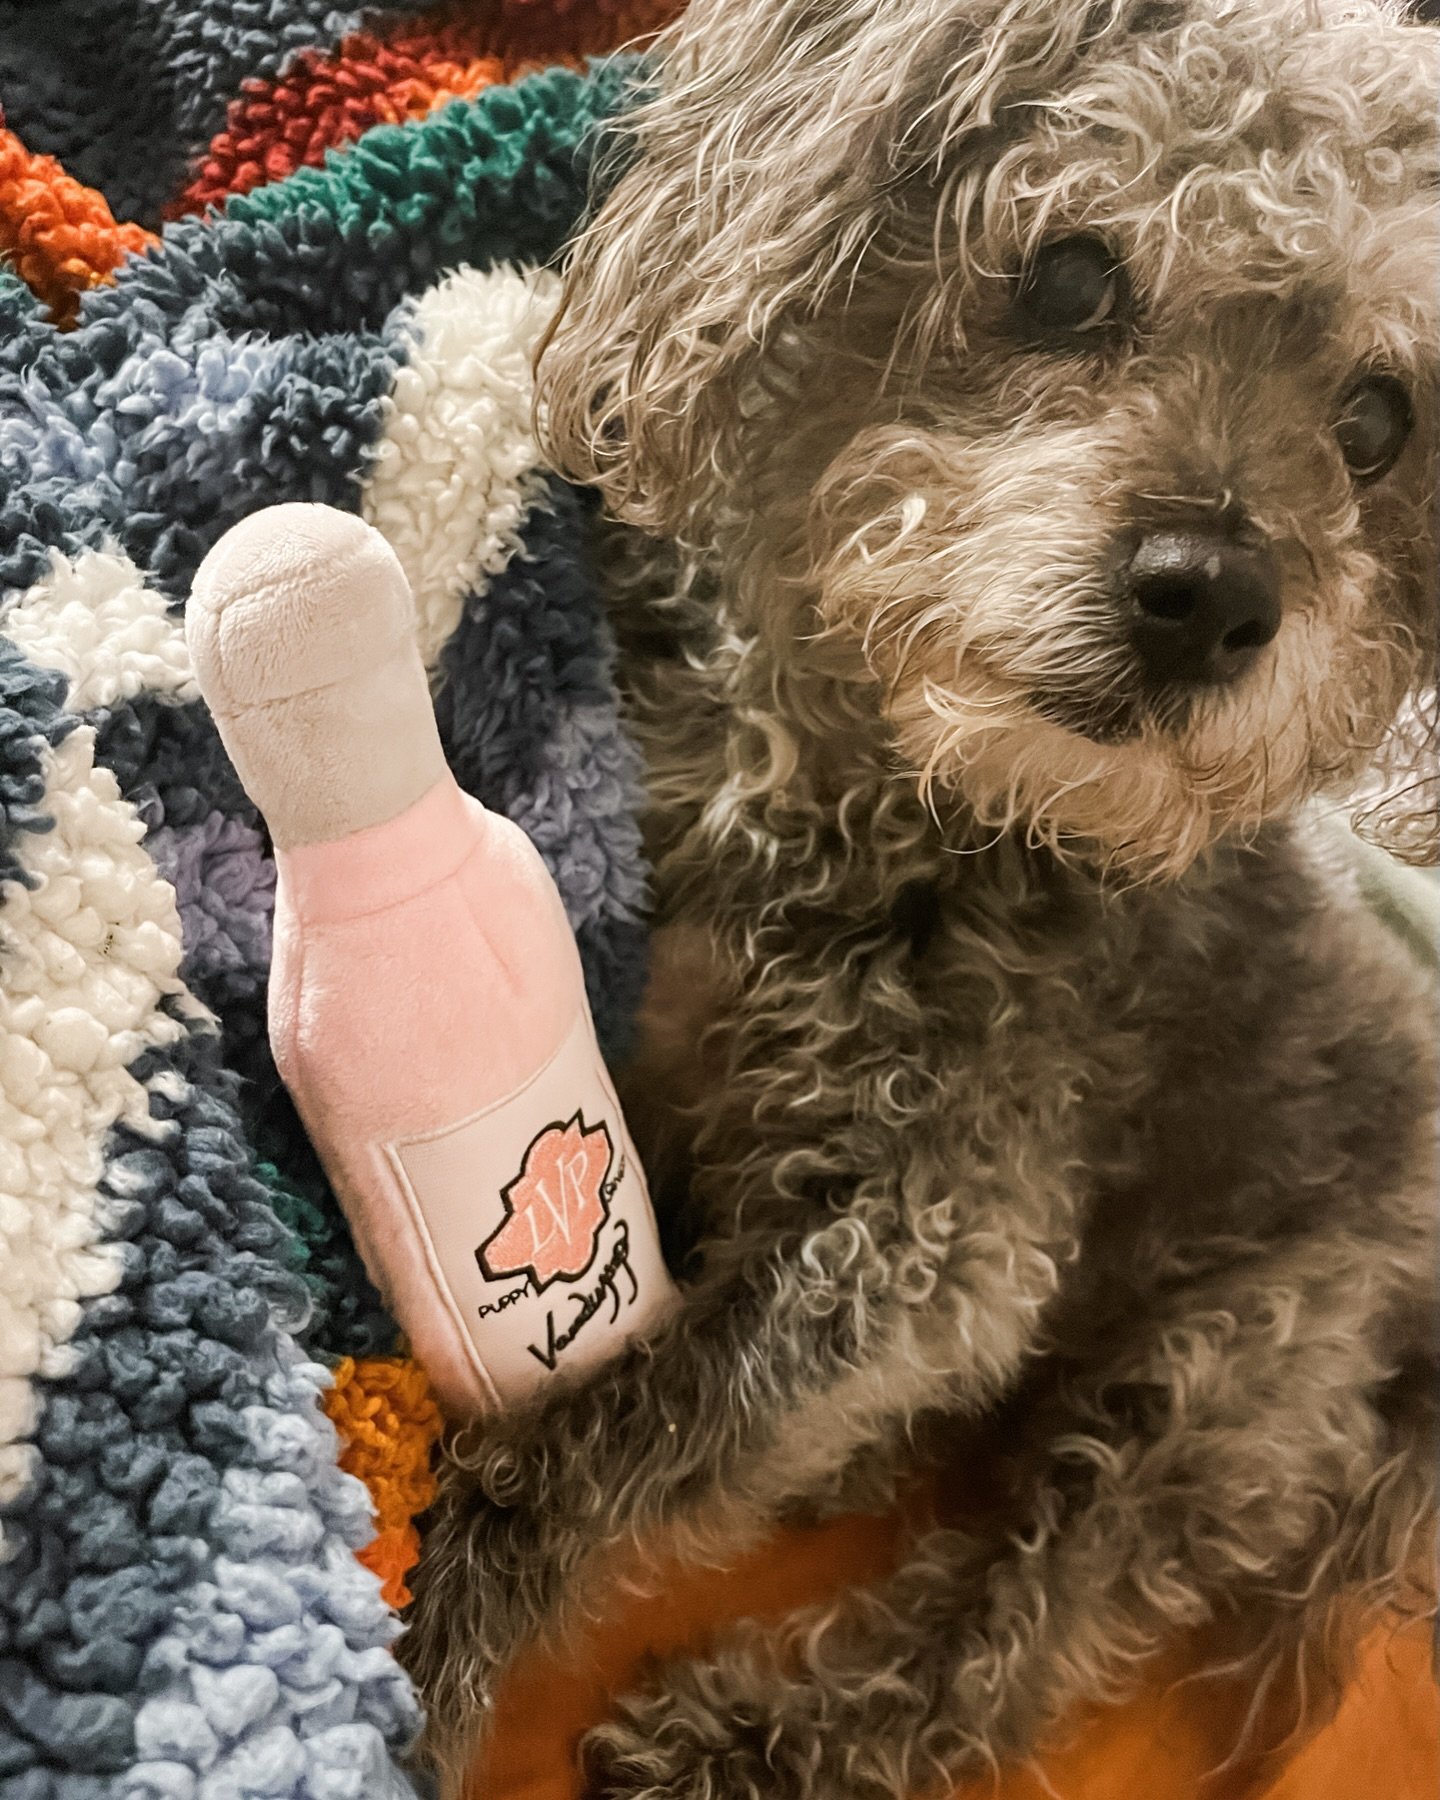 Meet Presley! This 14-year-old Schnauzer/Pinscher/Poodle mix belongs to two of our very own walkers, Emily and Damien! They started out as clients and soon after become a part of our team! HOW COOL IS THAT?! Presley is actually a dog, but is commonly